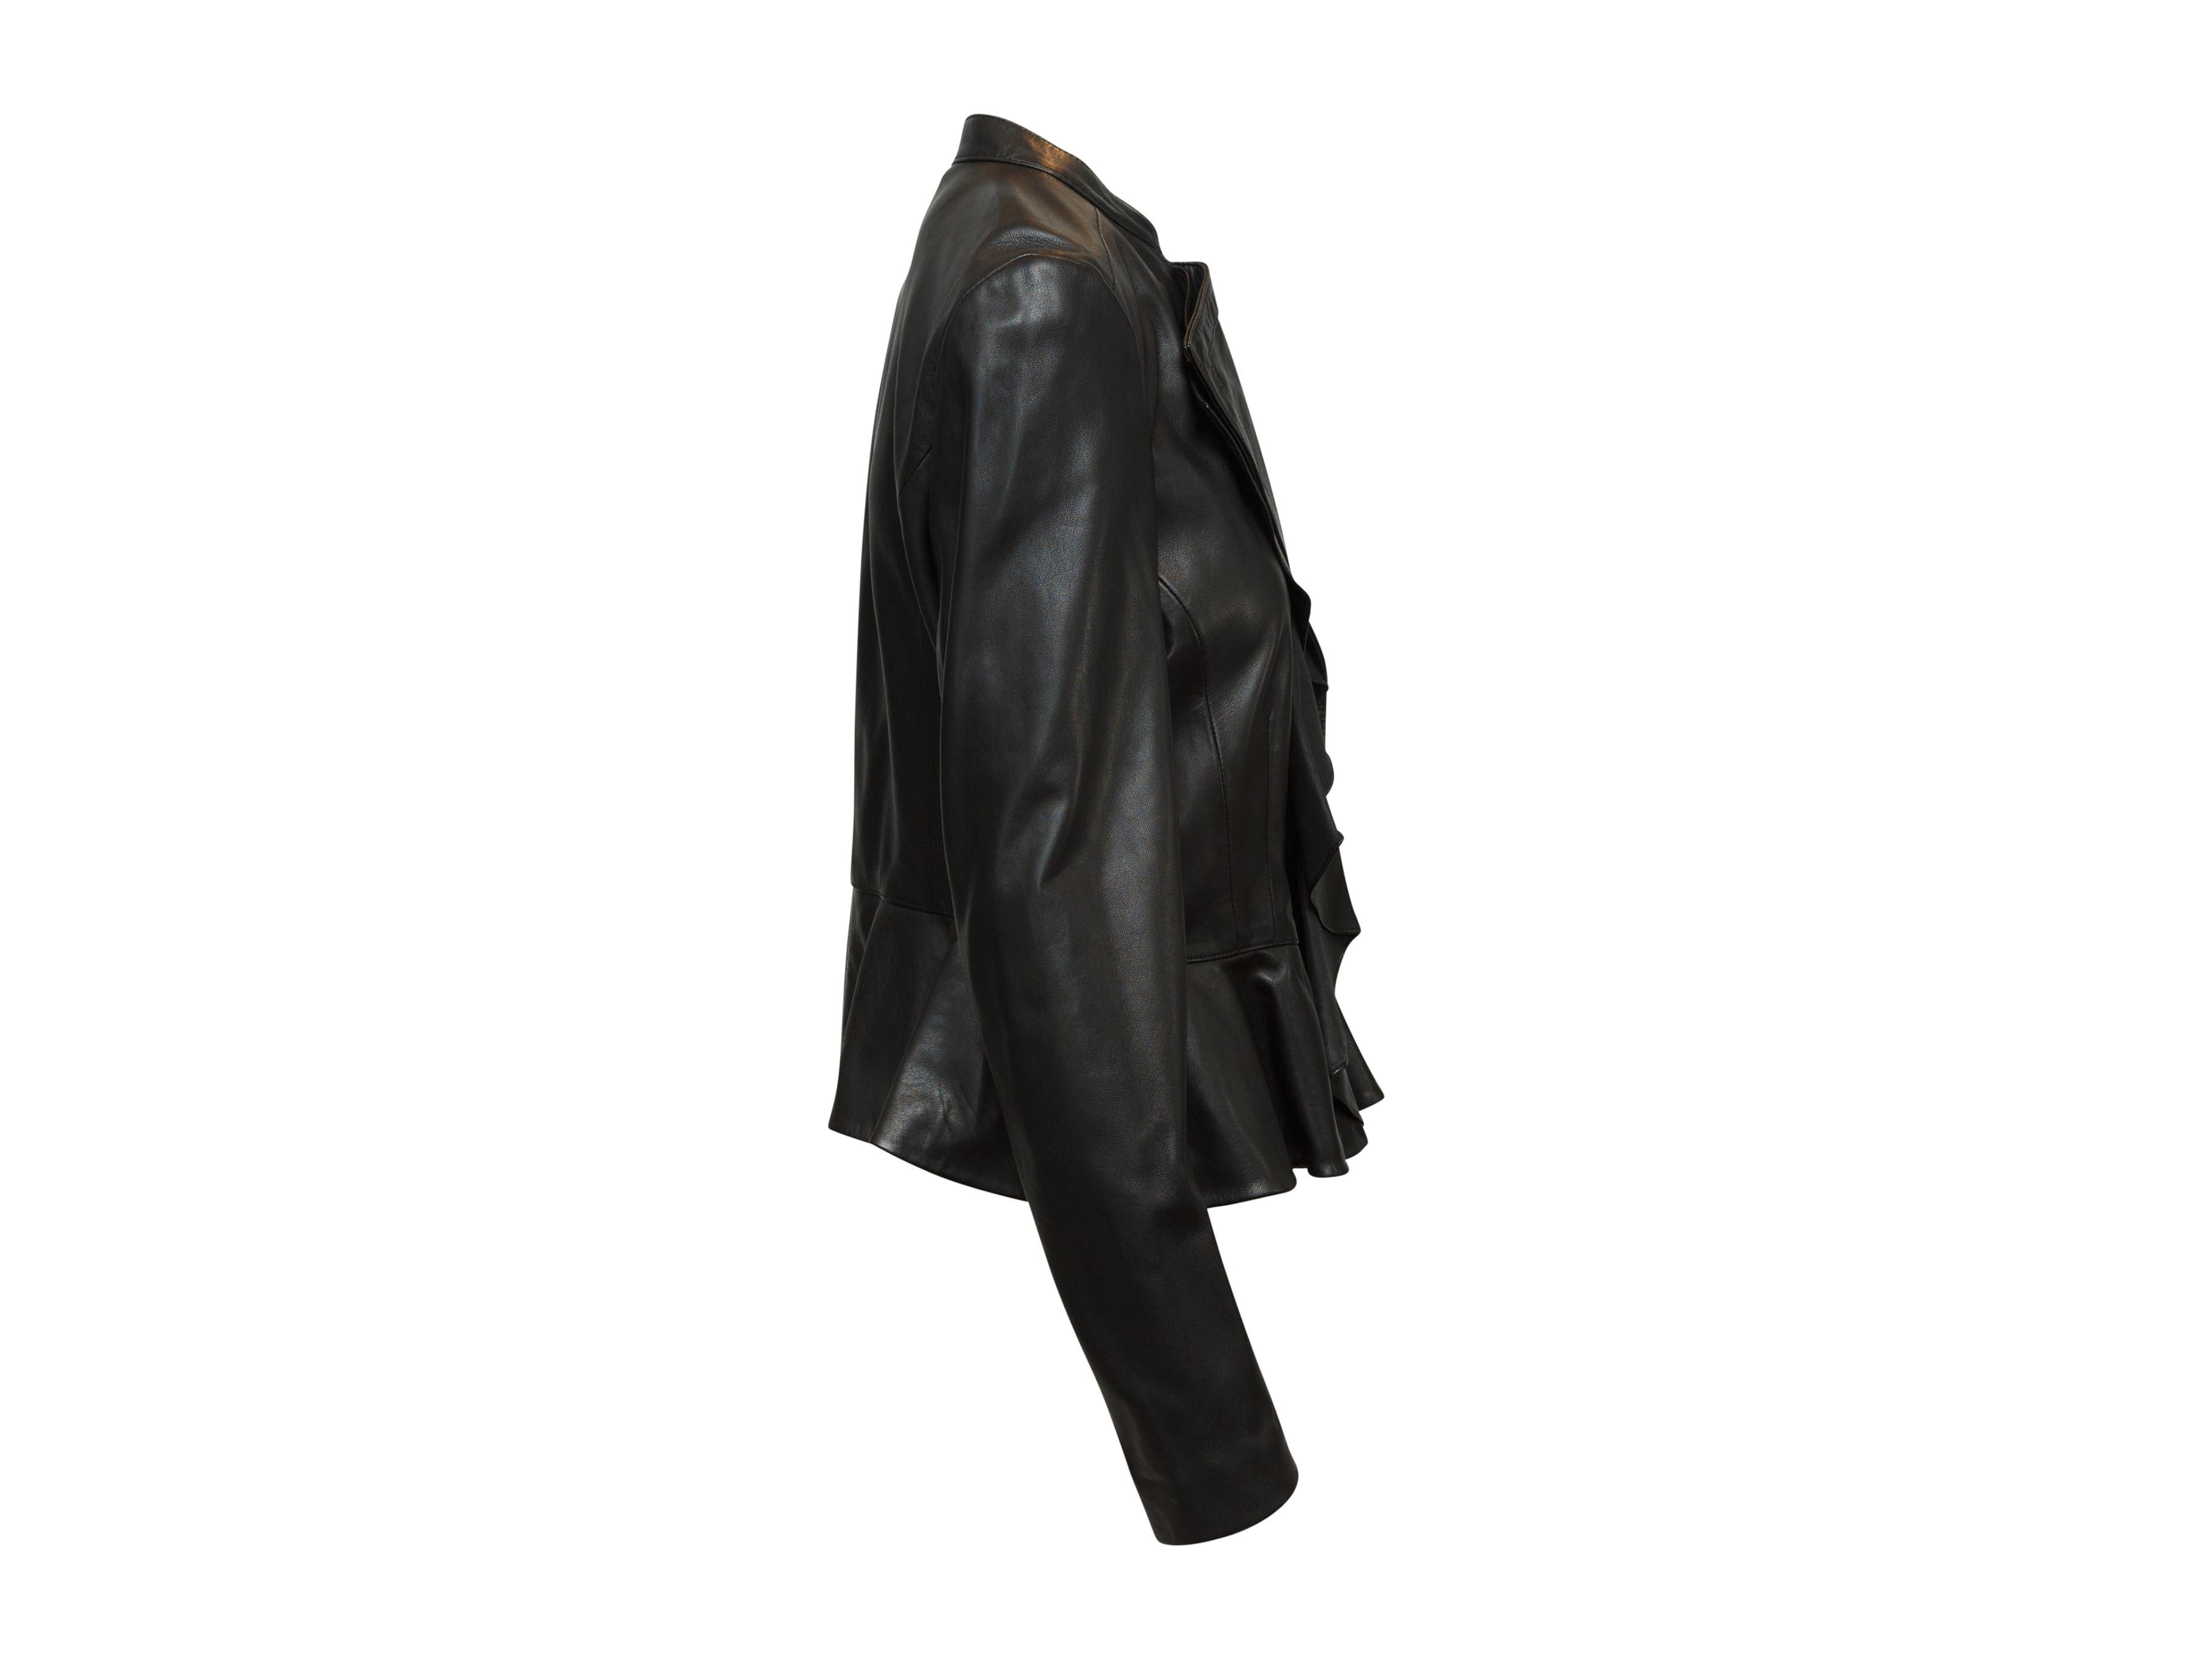 Product details: Black leather fitted jacket by Altuzarra. Crew neck. Ruffle trim. Zip closure at front. Designer size 42. 32